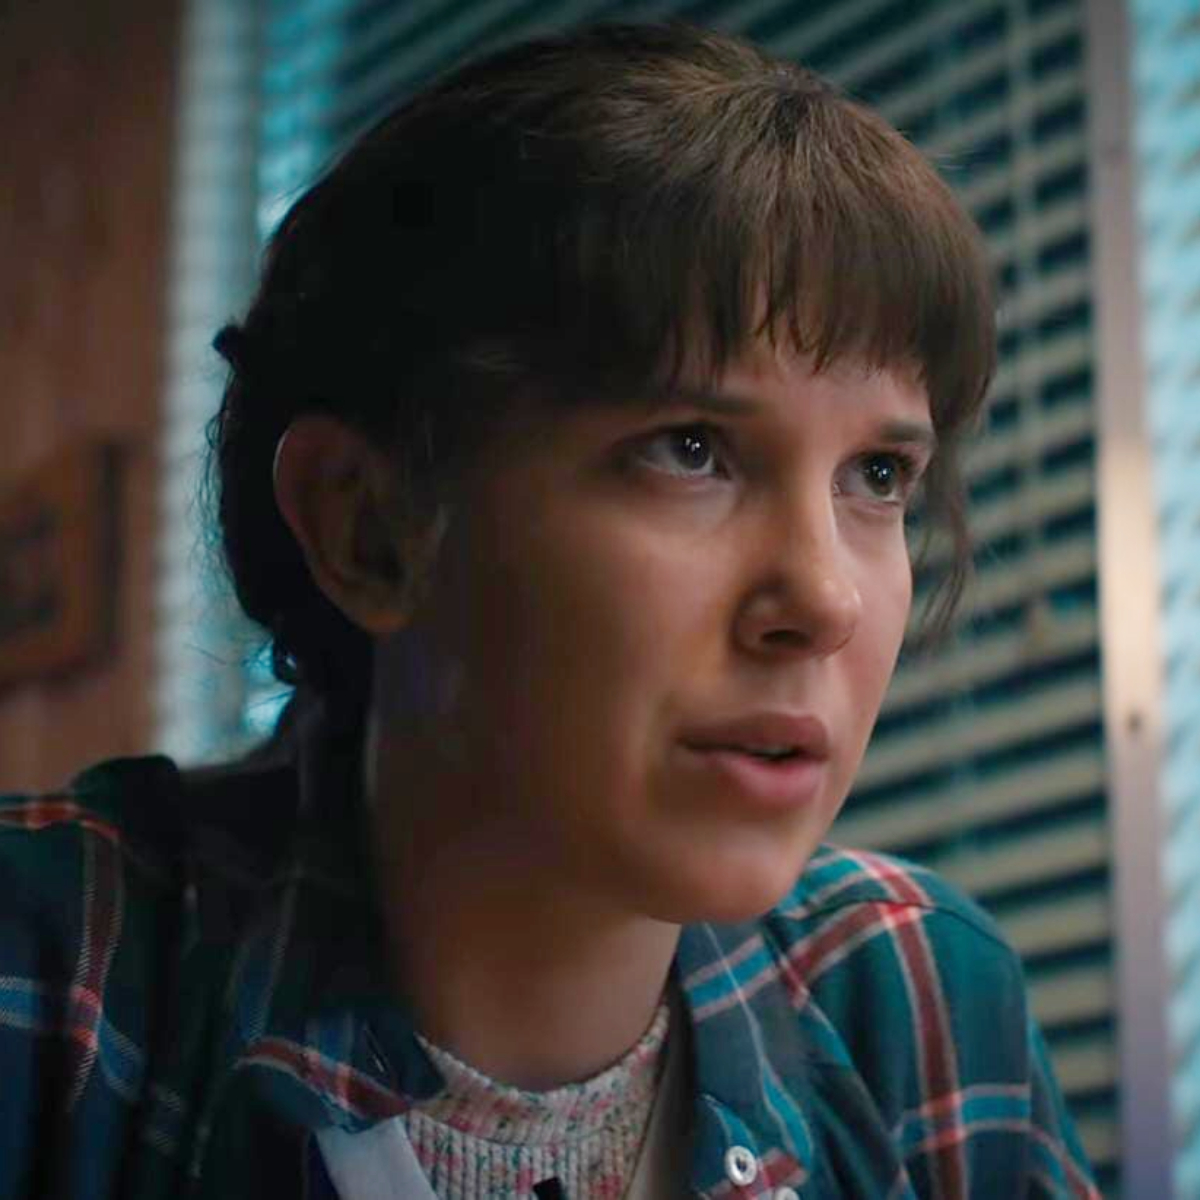 Stranger Things S4 to Delhi Crime S2; Here are the top shows to come back with new seasons in 2022